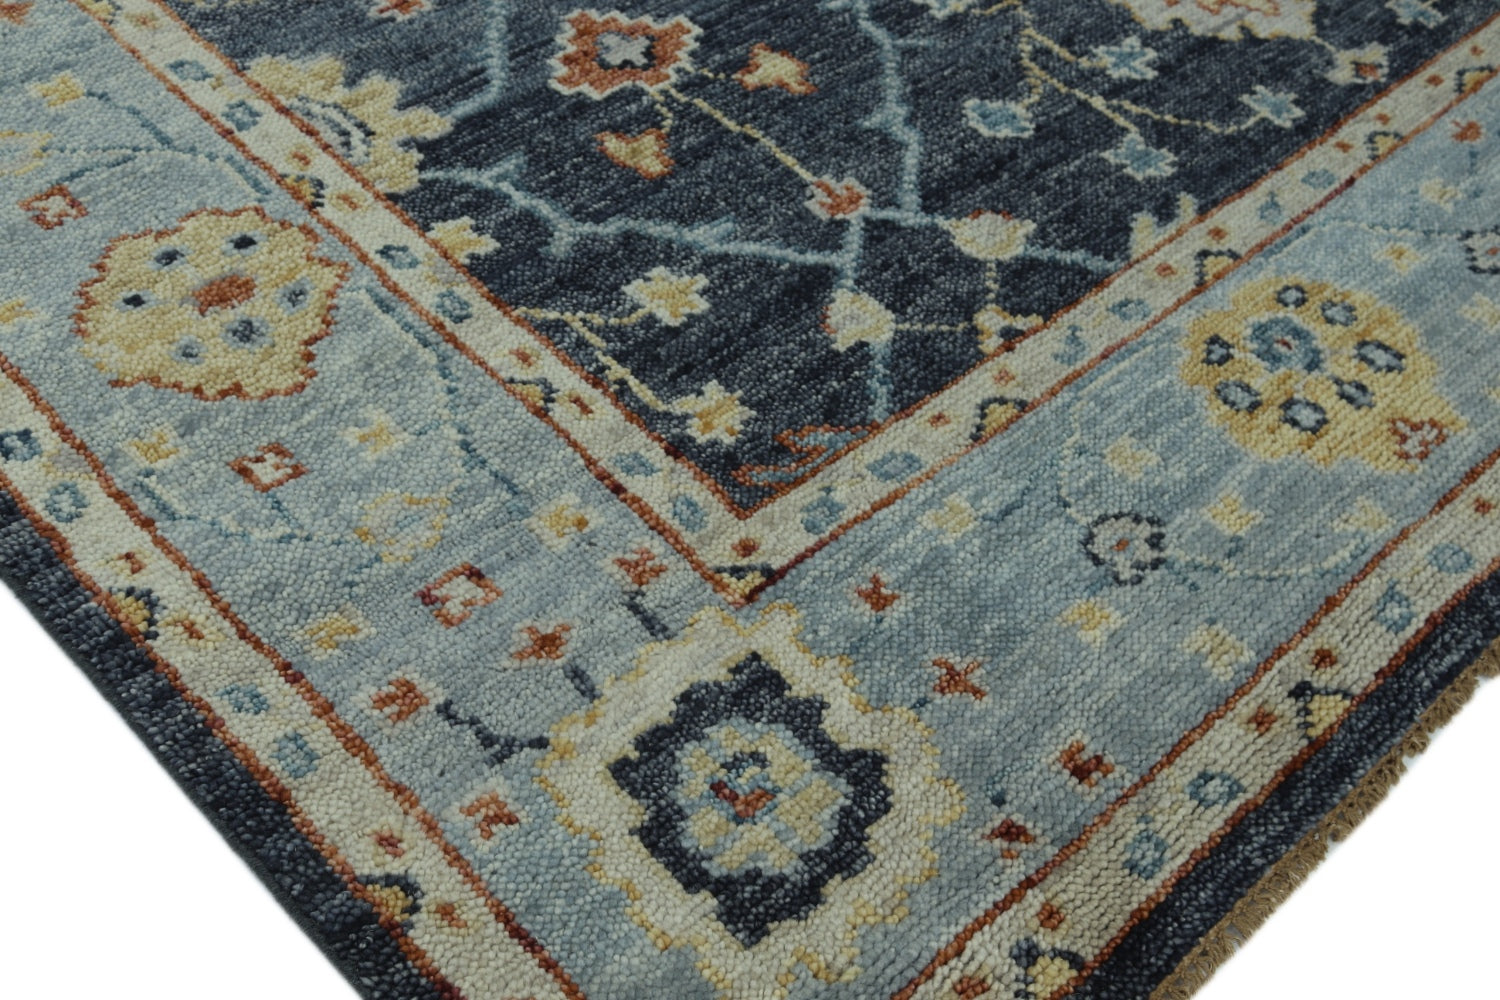 Sultanabad 3 Handwoven Traditional Rug, J71735